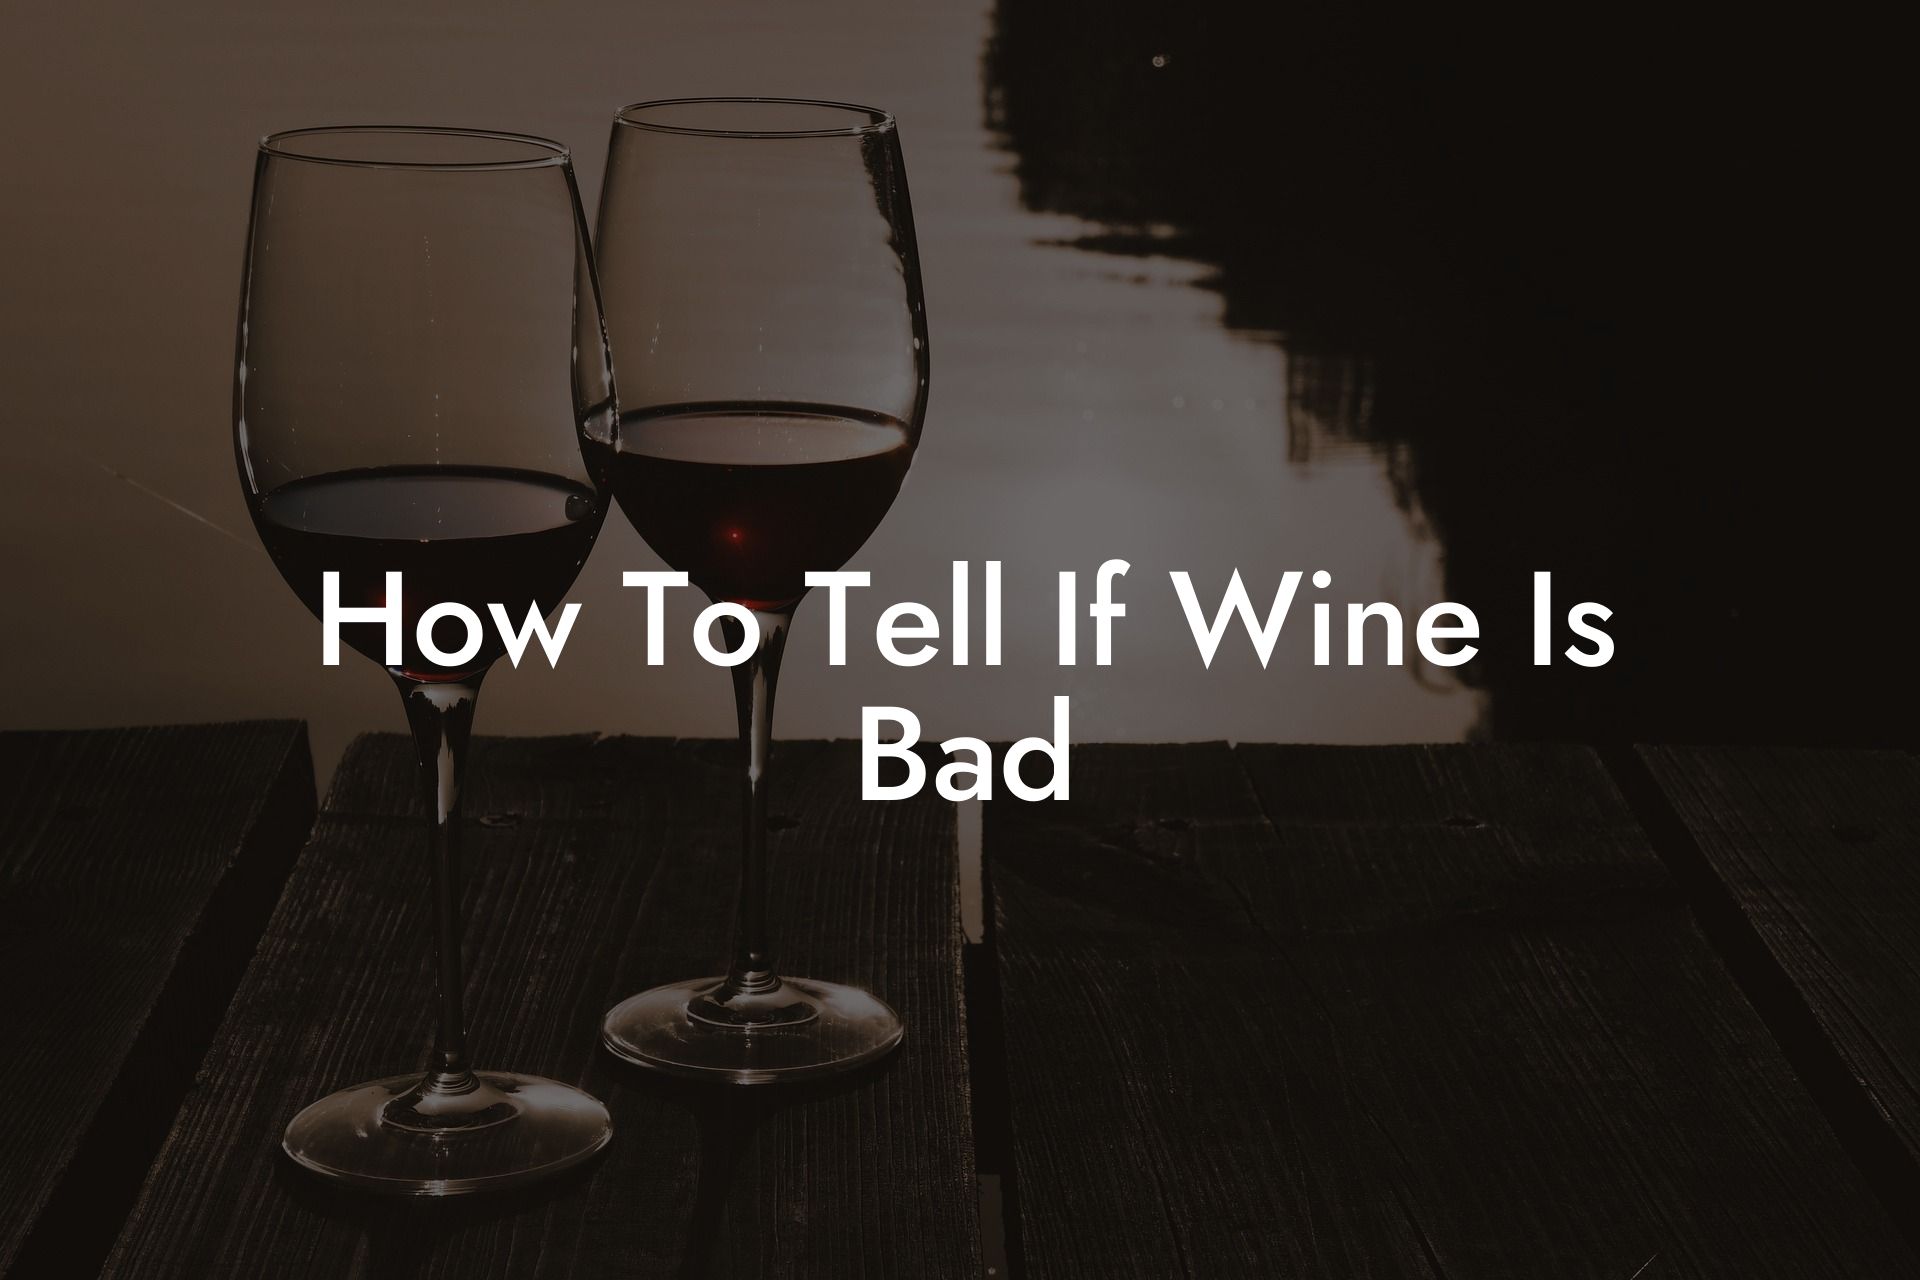 How To Tell If Wine Is Bad